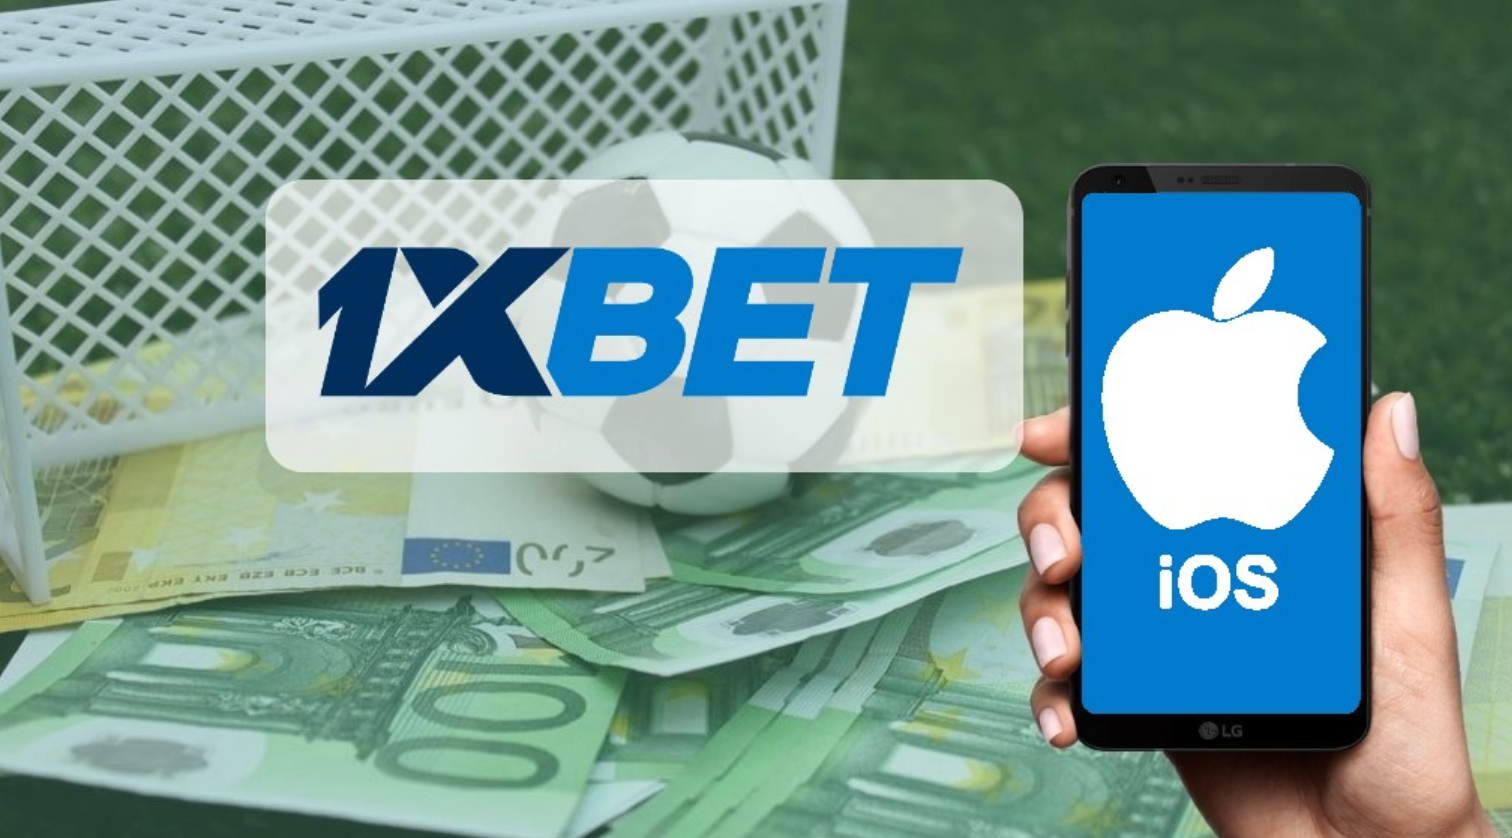 How to download program for iOS by 1xBet?